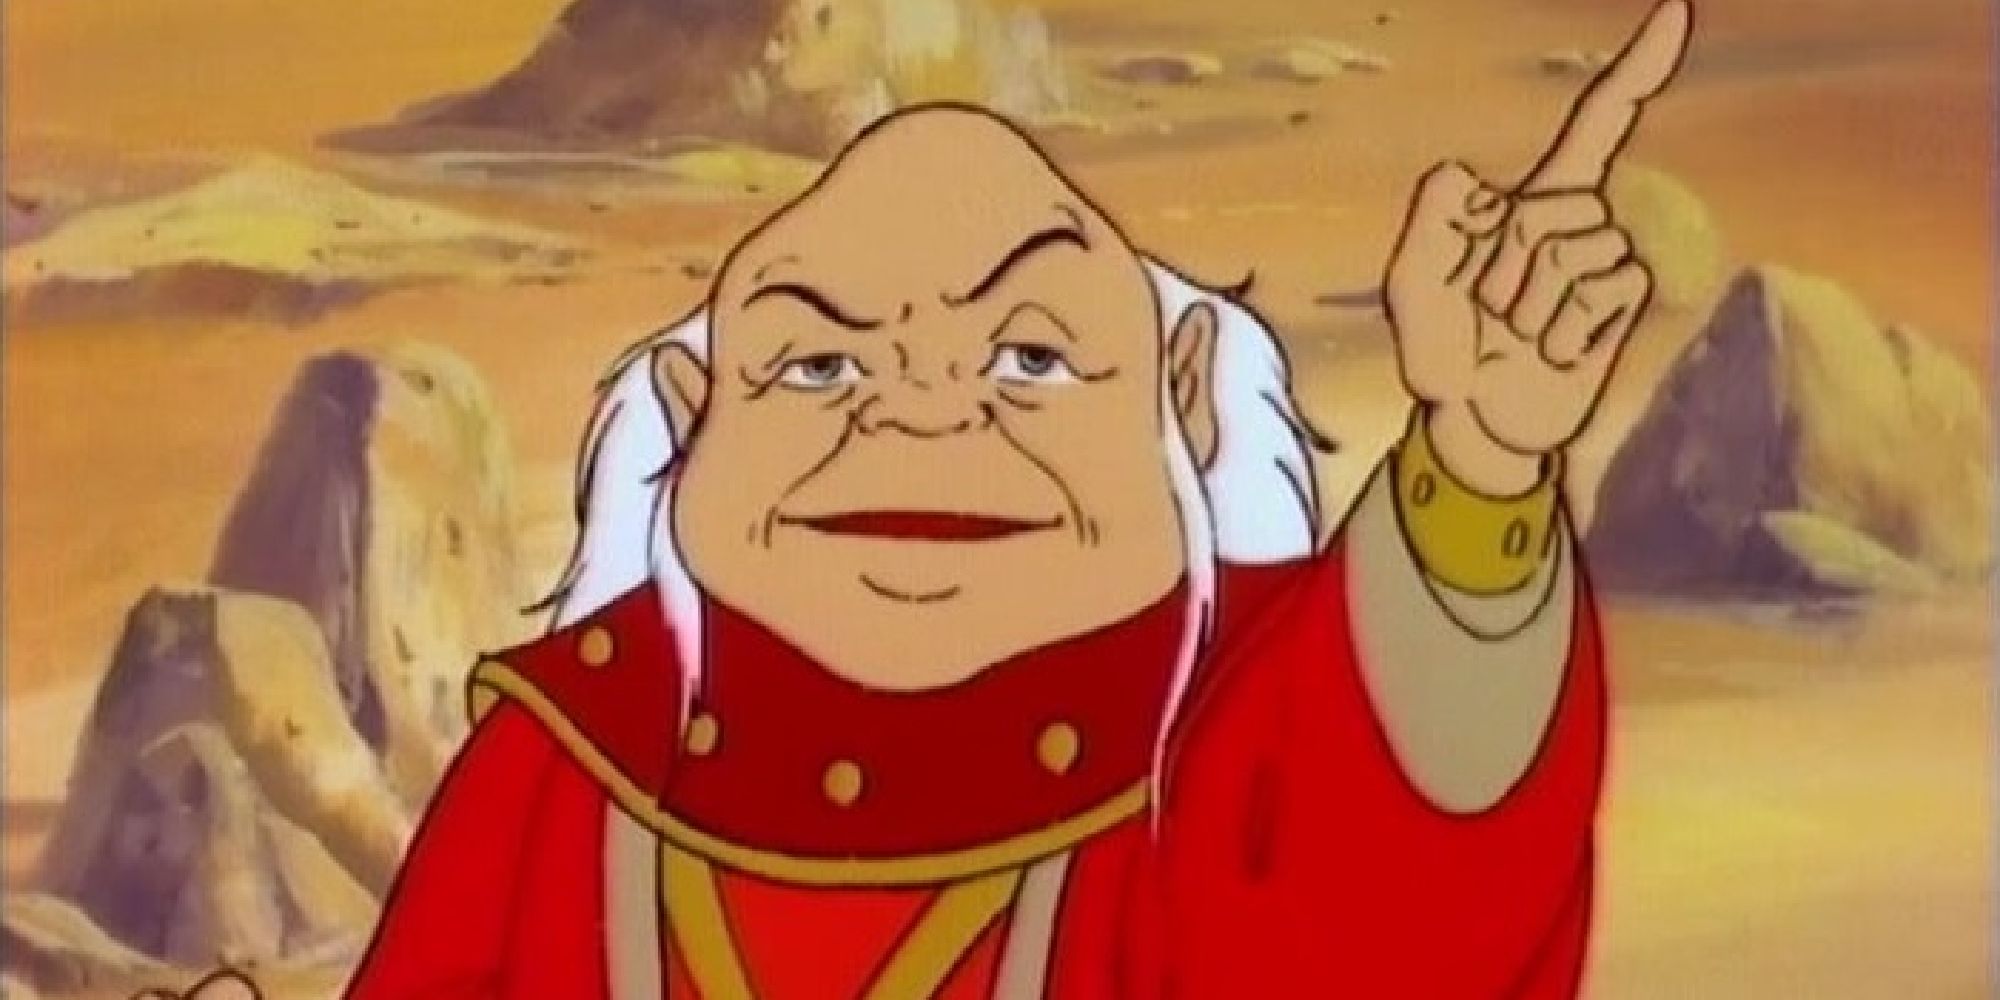 The dungeon master from the 1980s D&D cartoon, holding one finger skyward as he addresses people off-screen.